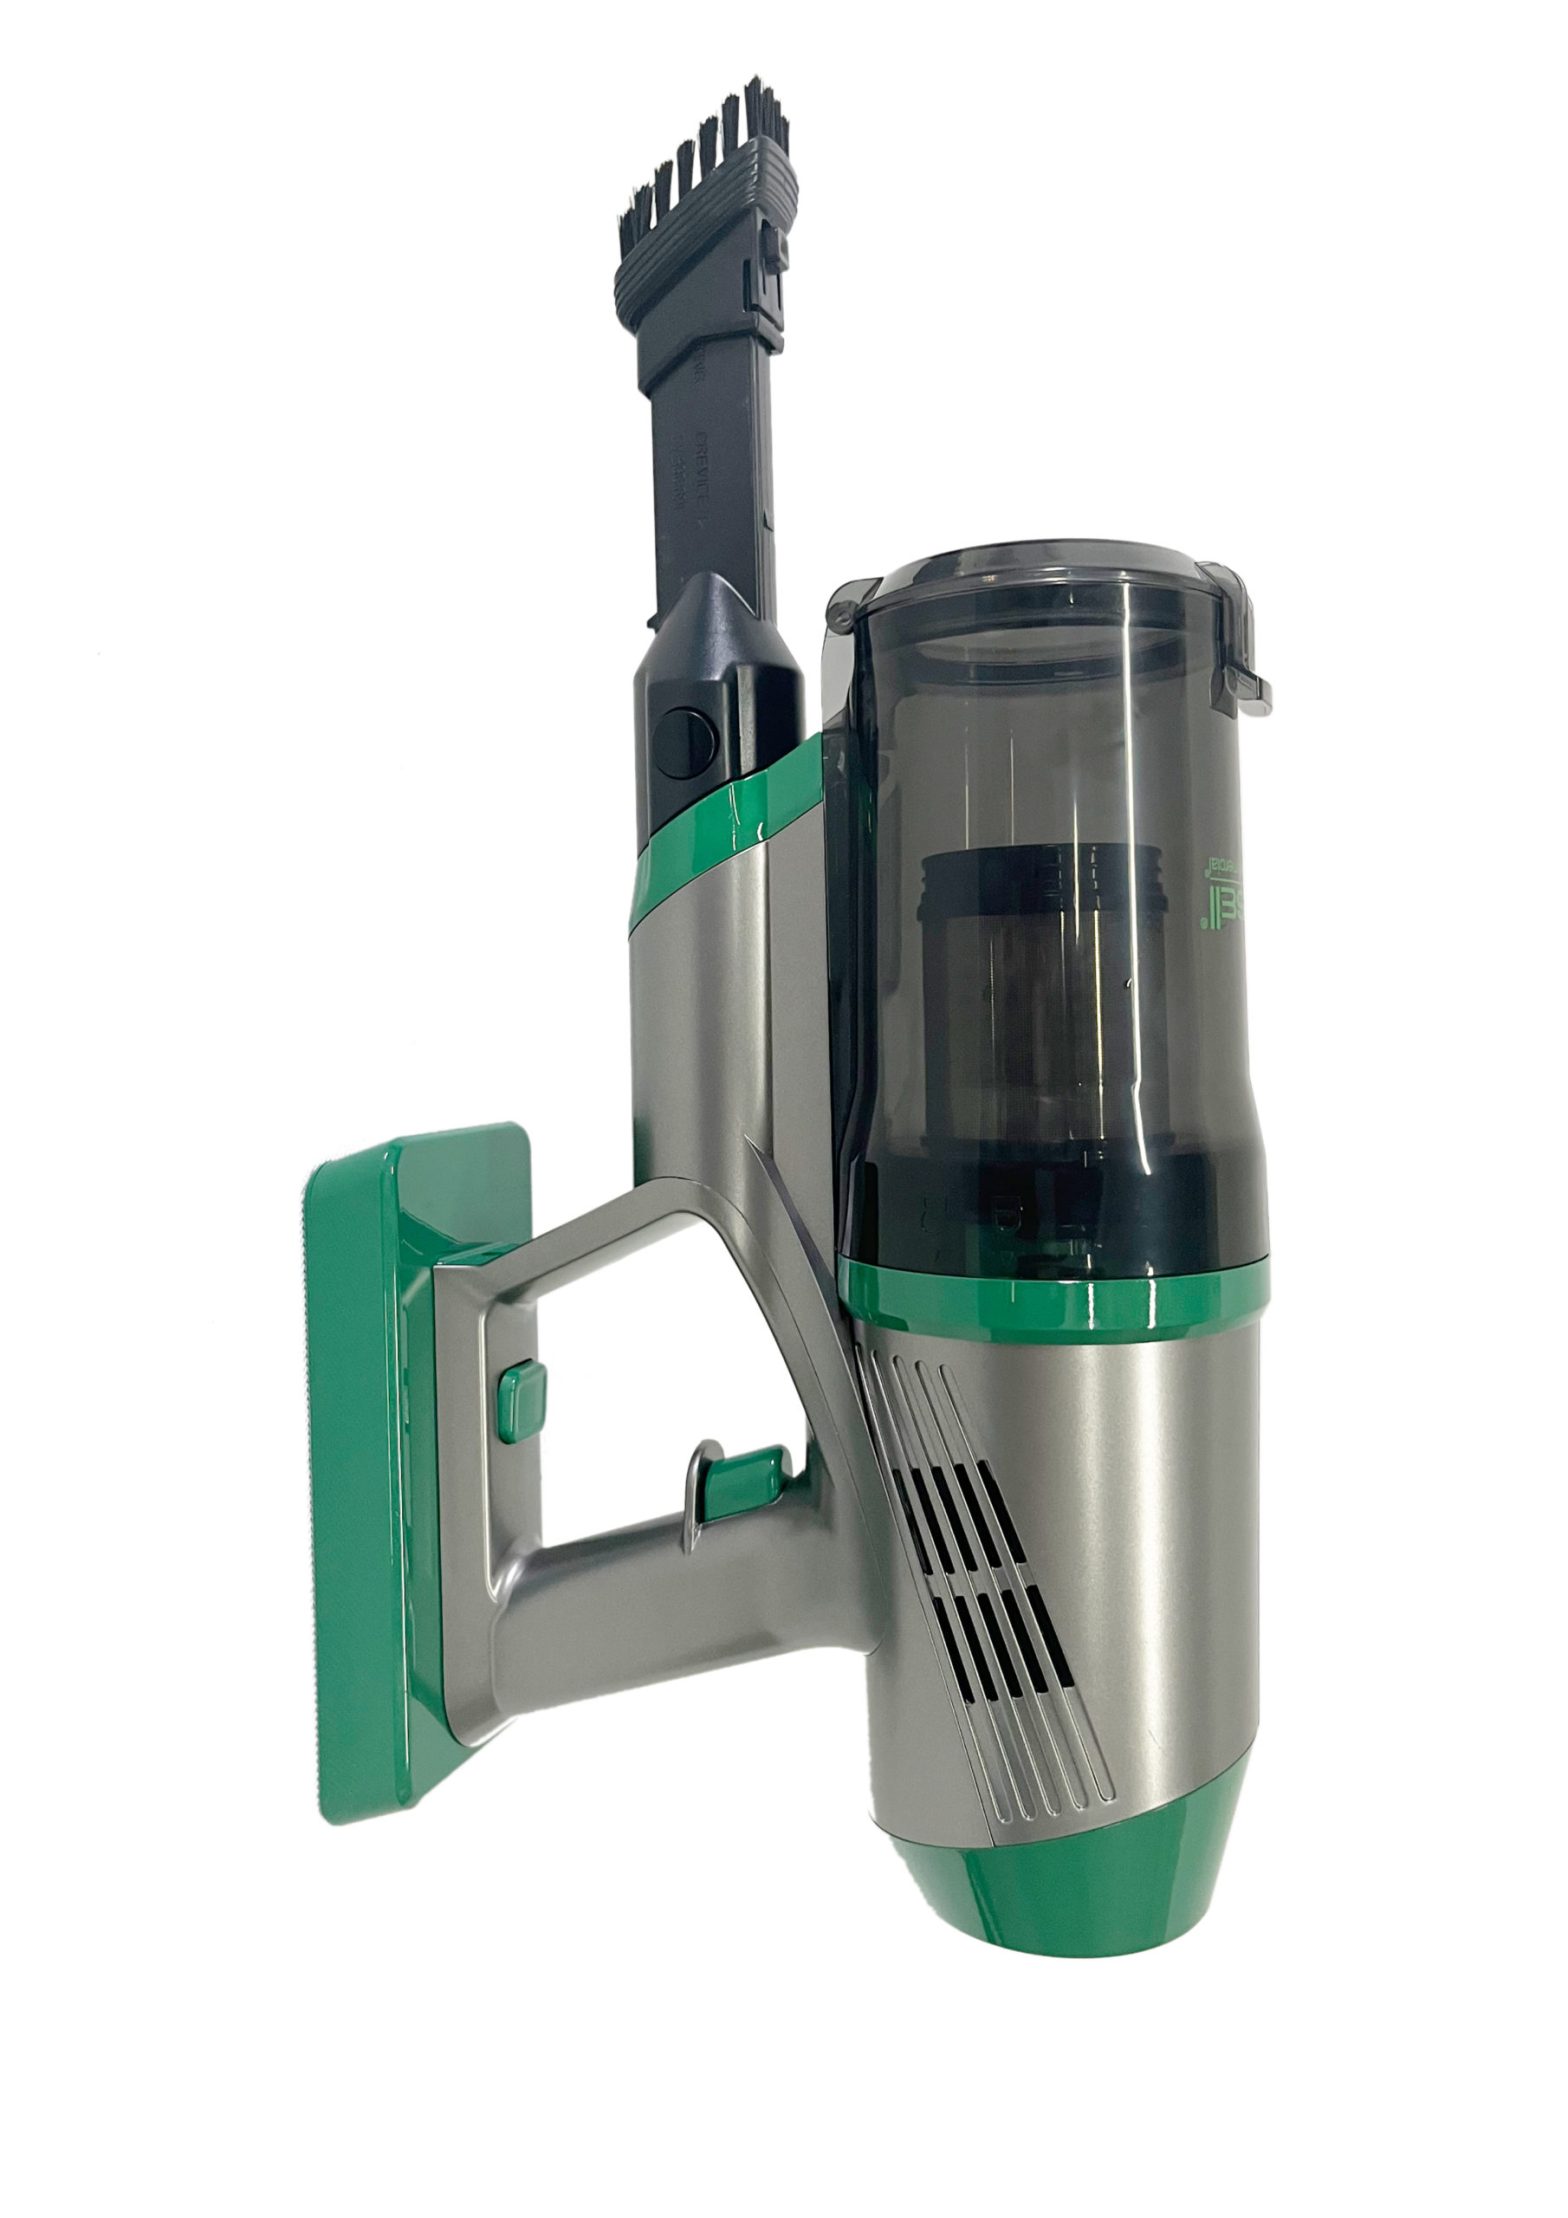 New Bissell Commercial Battery Powered Stick Vacuum